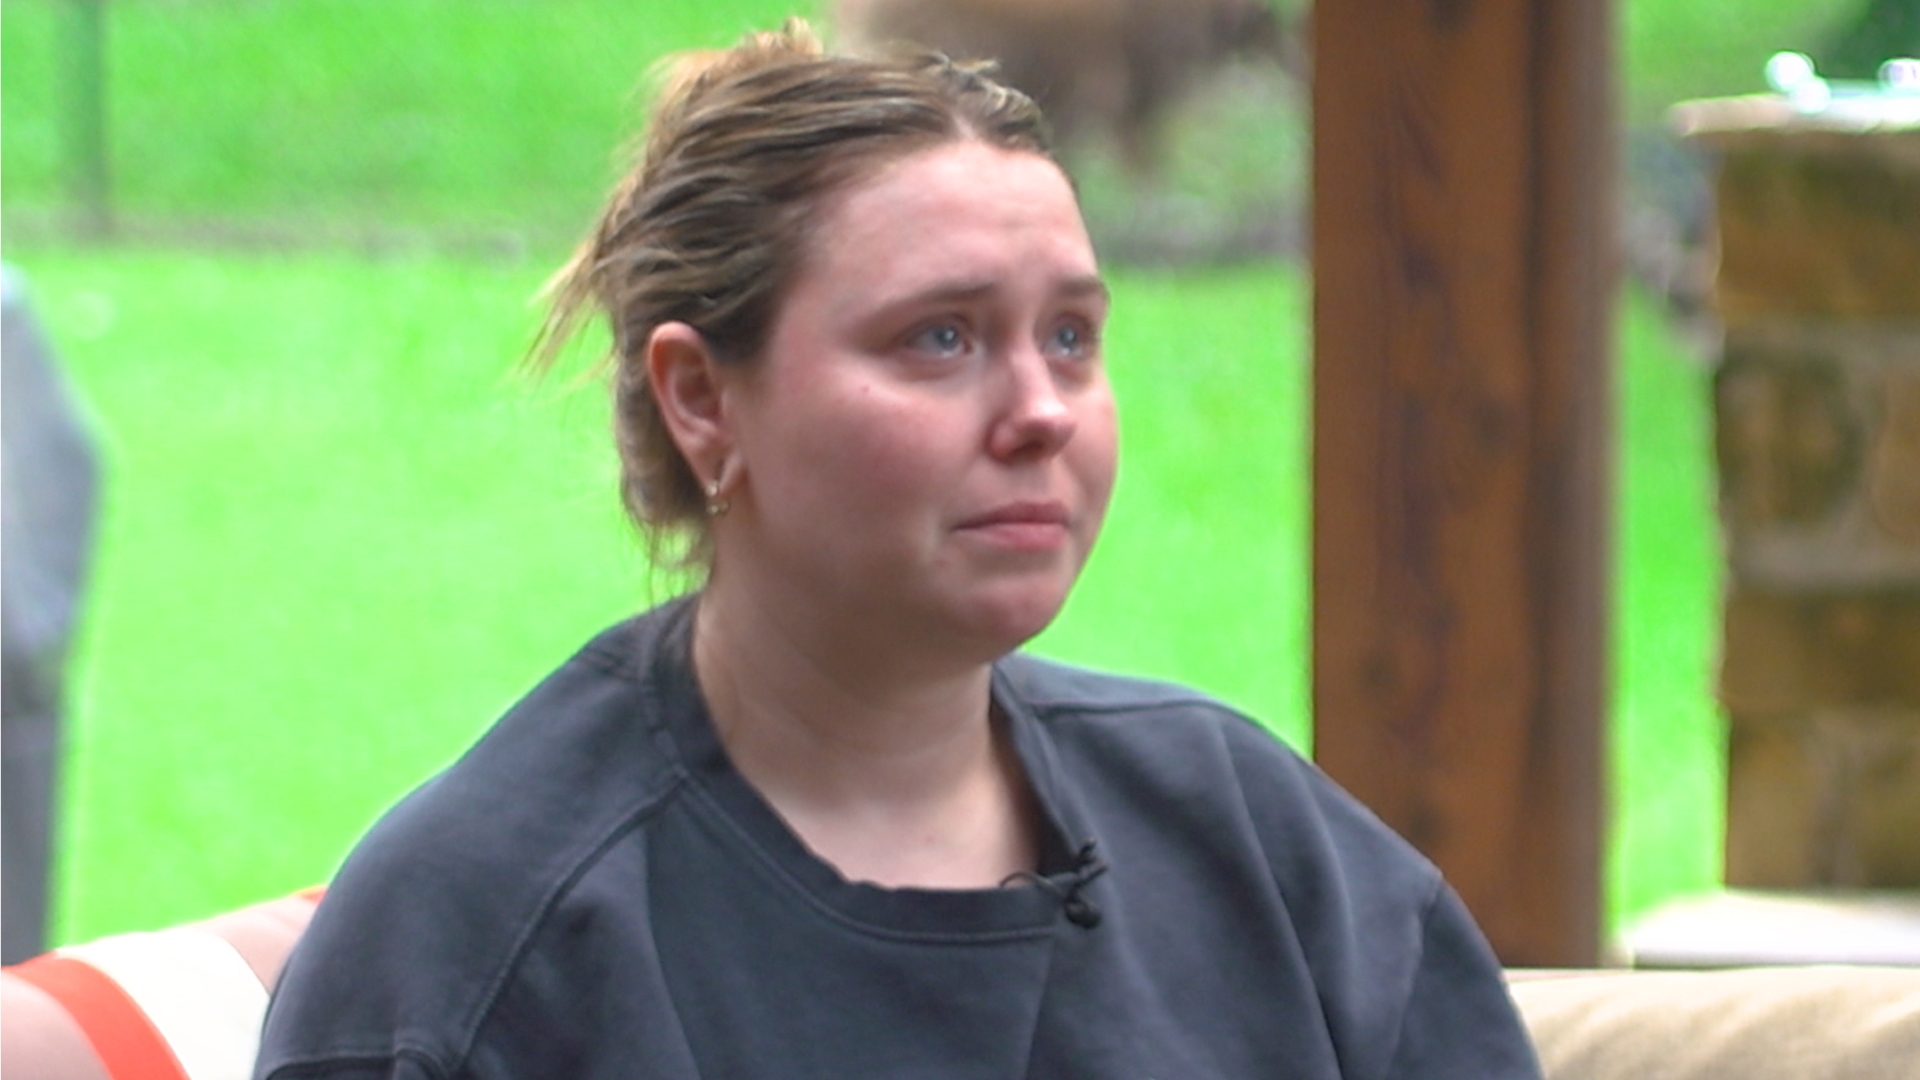 Chelsey Warren said she carried her 4-year-old son, Lucas, on her back and fought to survive as water rushed by. This is her full interview.